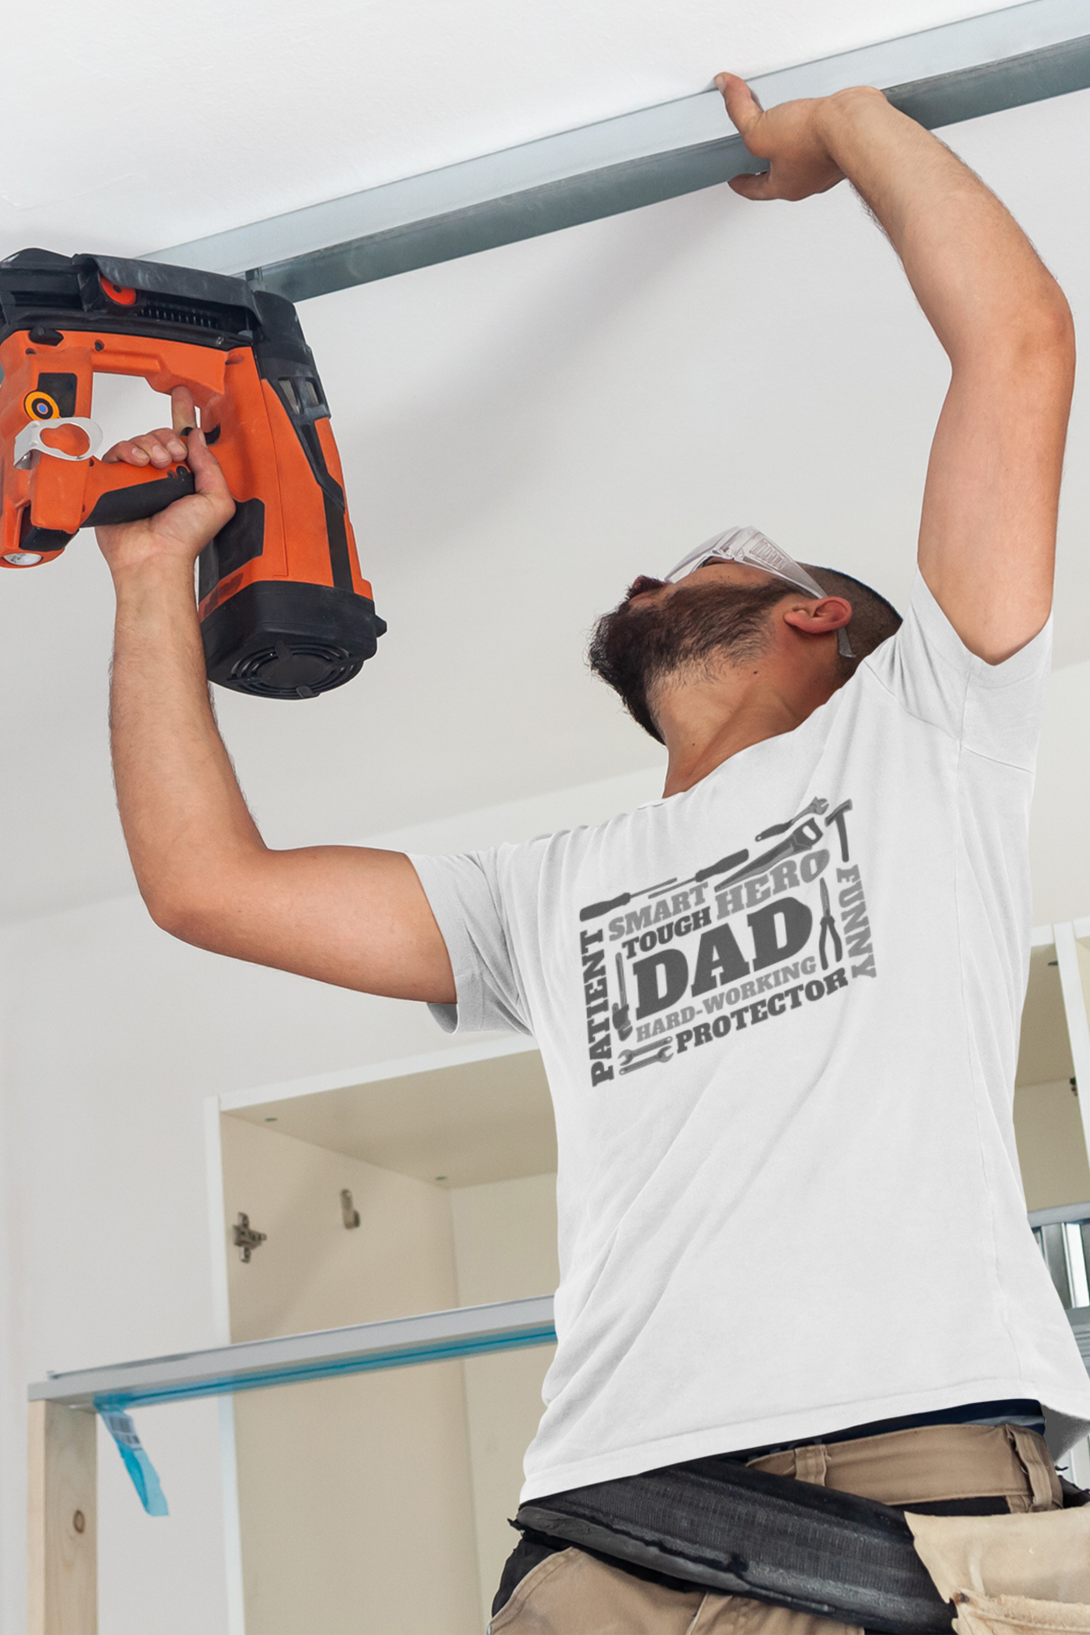 Mechanical Tools And Dad Printed T-Shirt For Men - WowWaves - 4